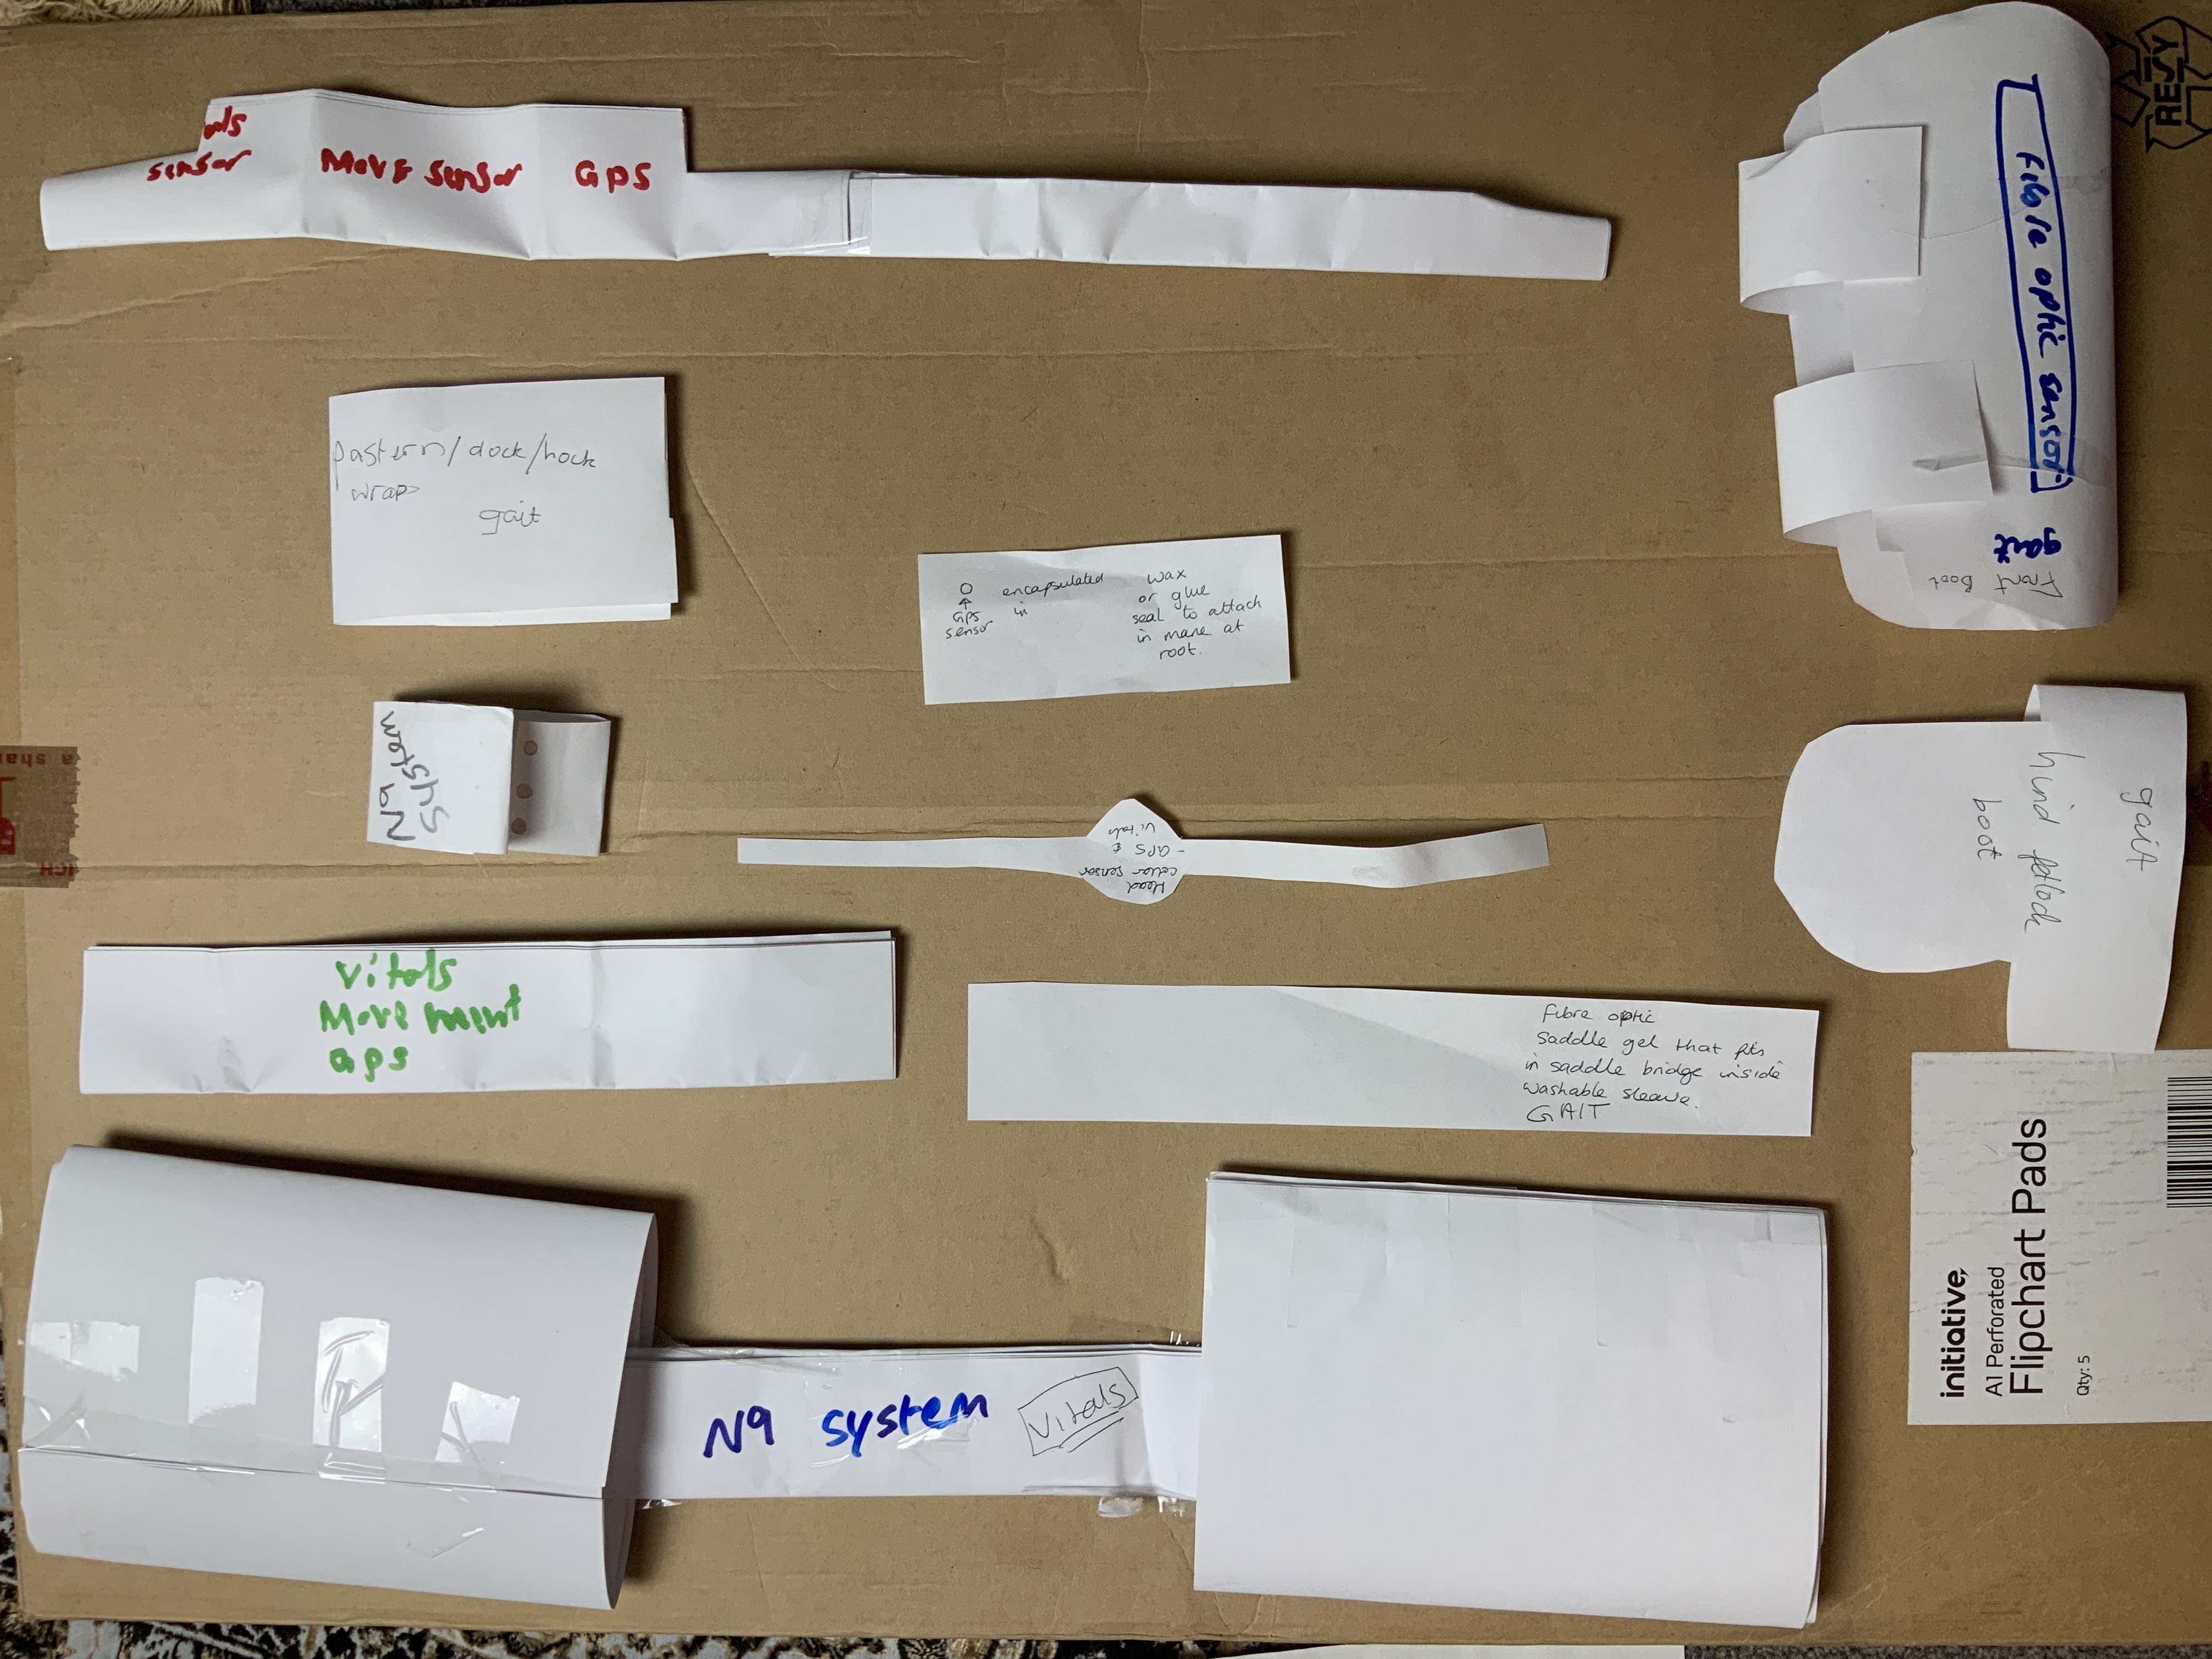 Abdul's portolio project tittled: N9, a Fitbit for Horses. image of  all paper prototype  on paper.